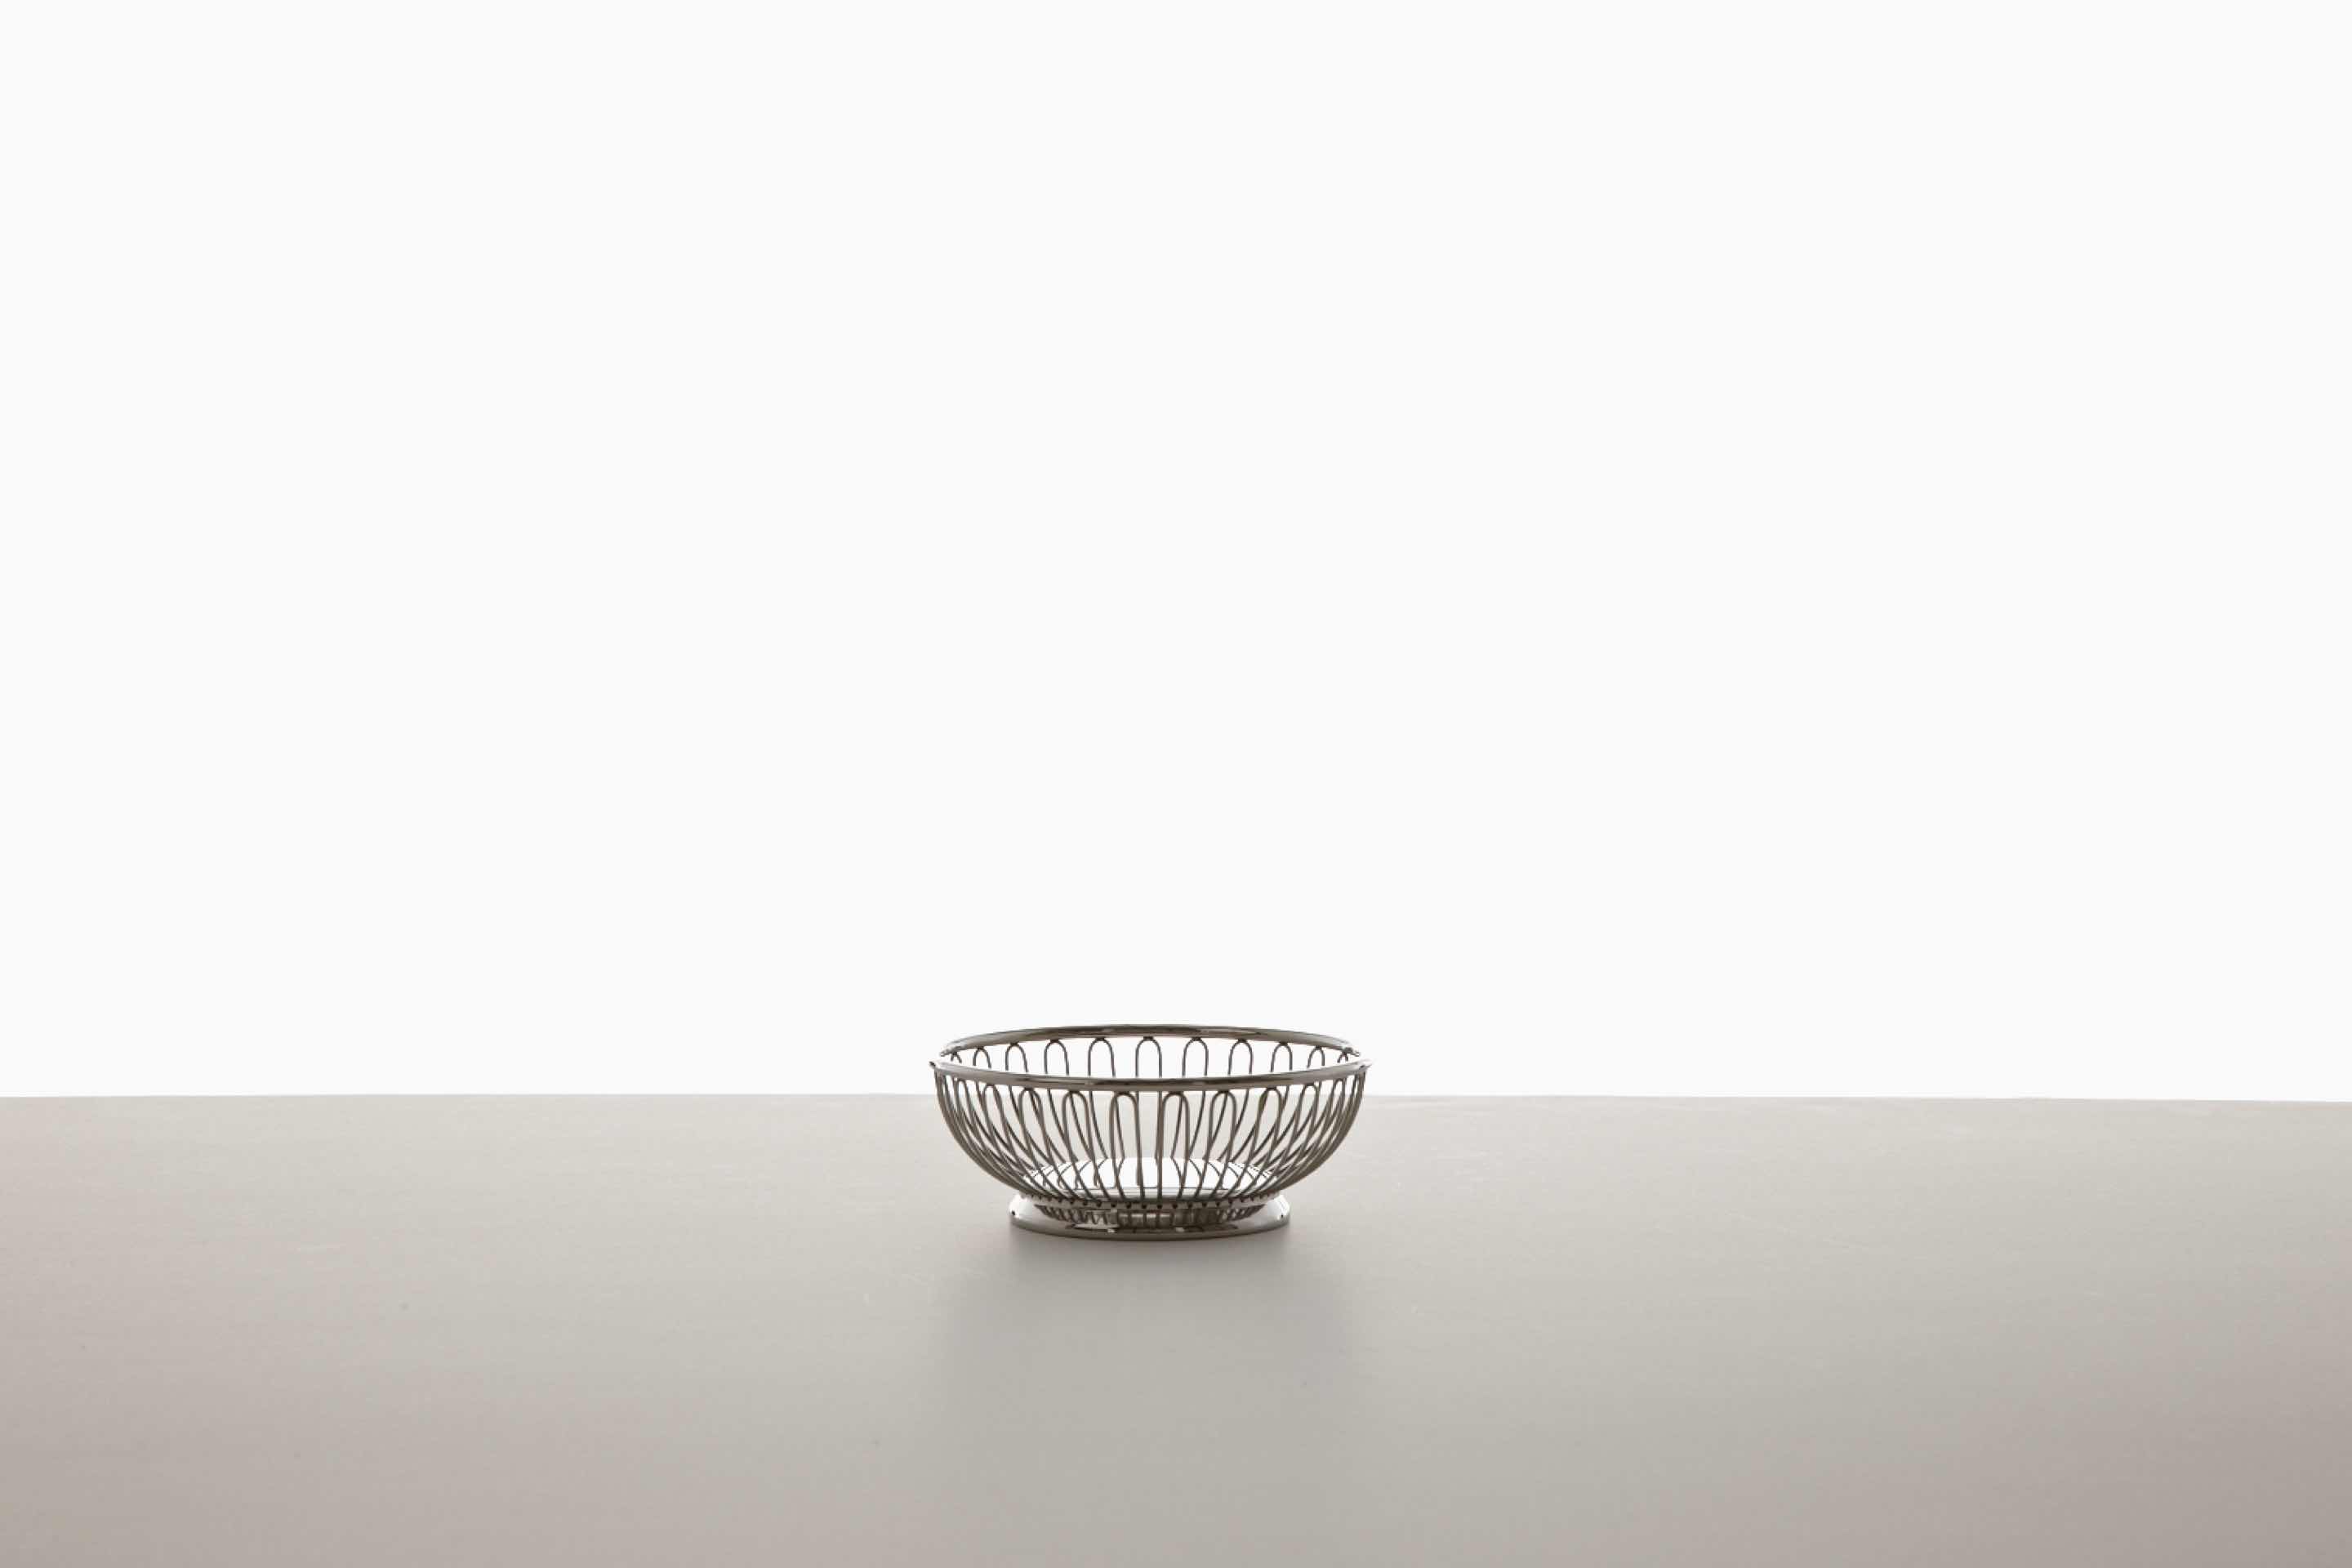 A small, round, and empty wire basket.